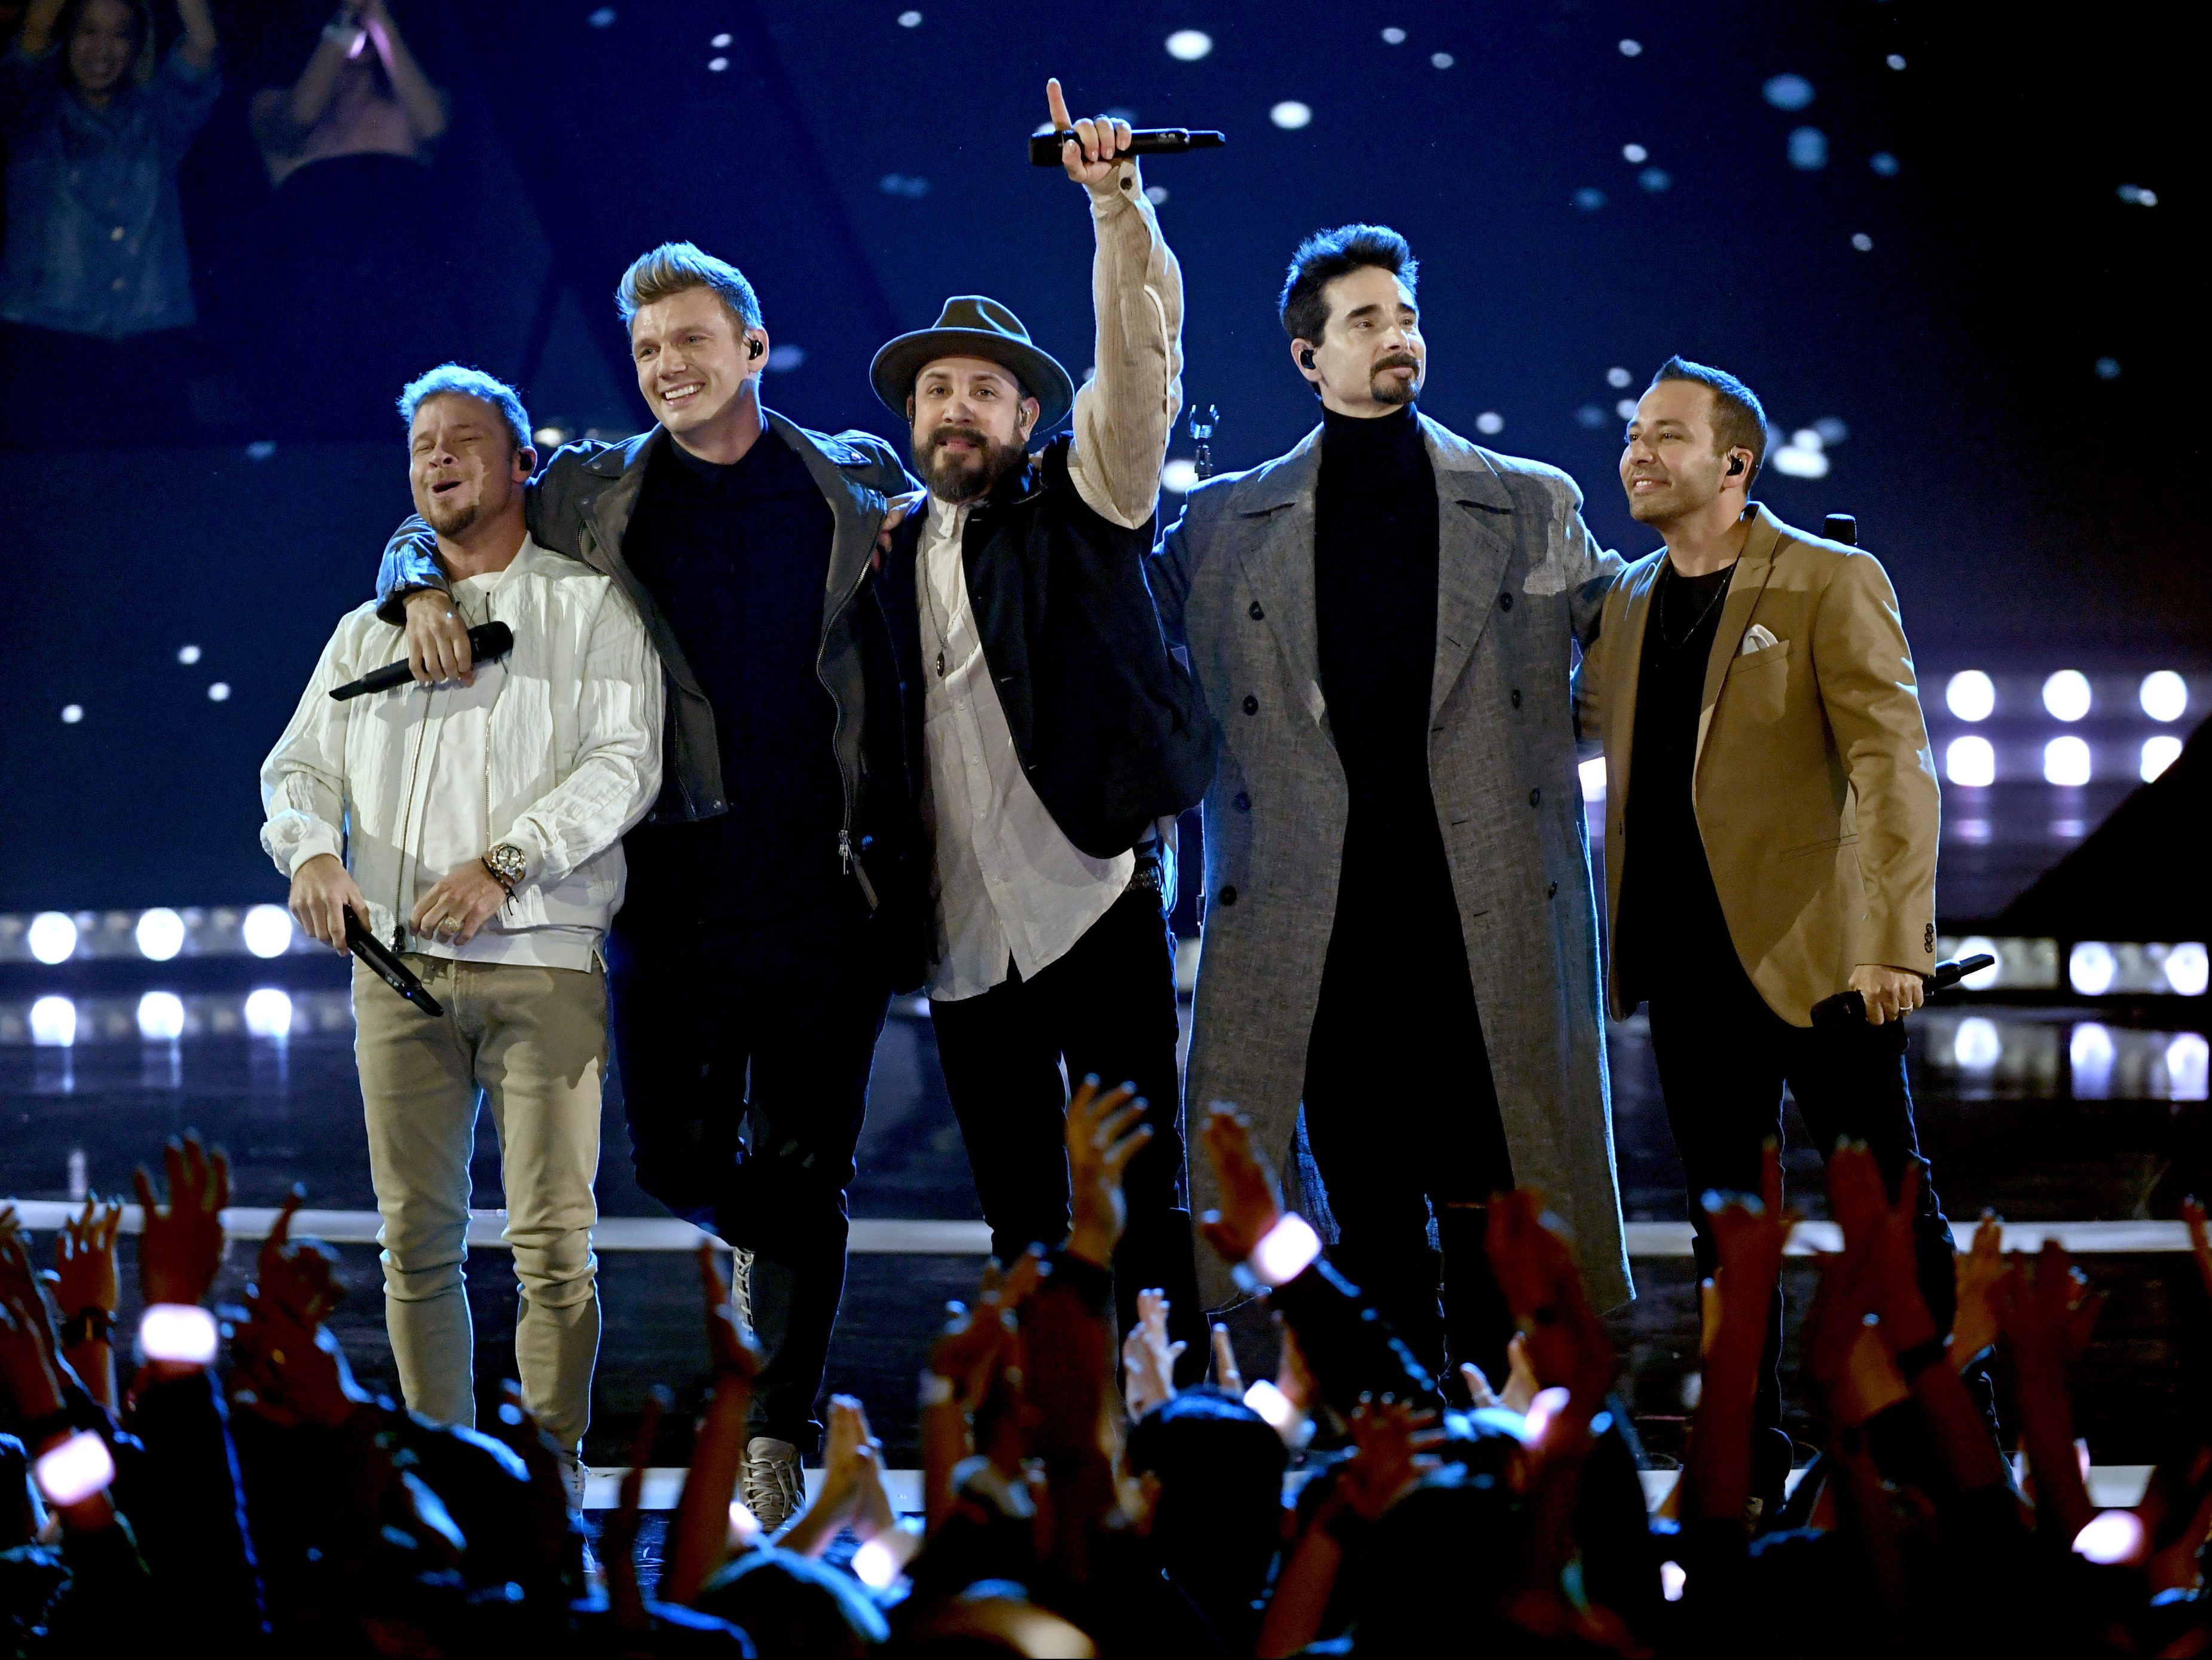 Backstreet Boys fans upset over cancelled show due to storm